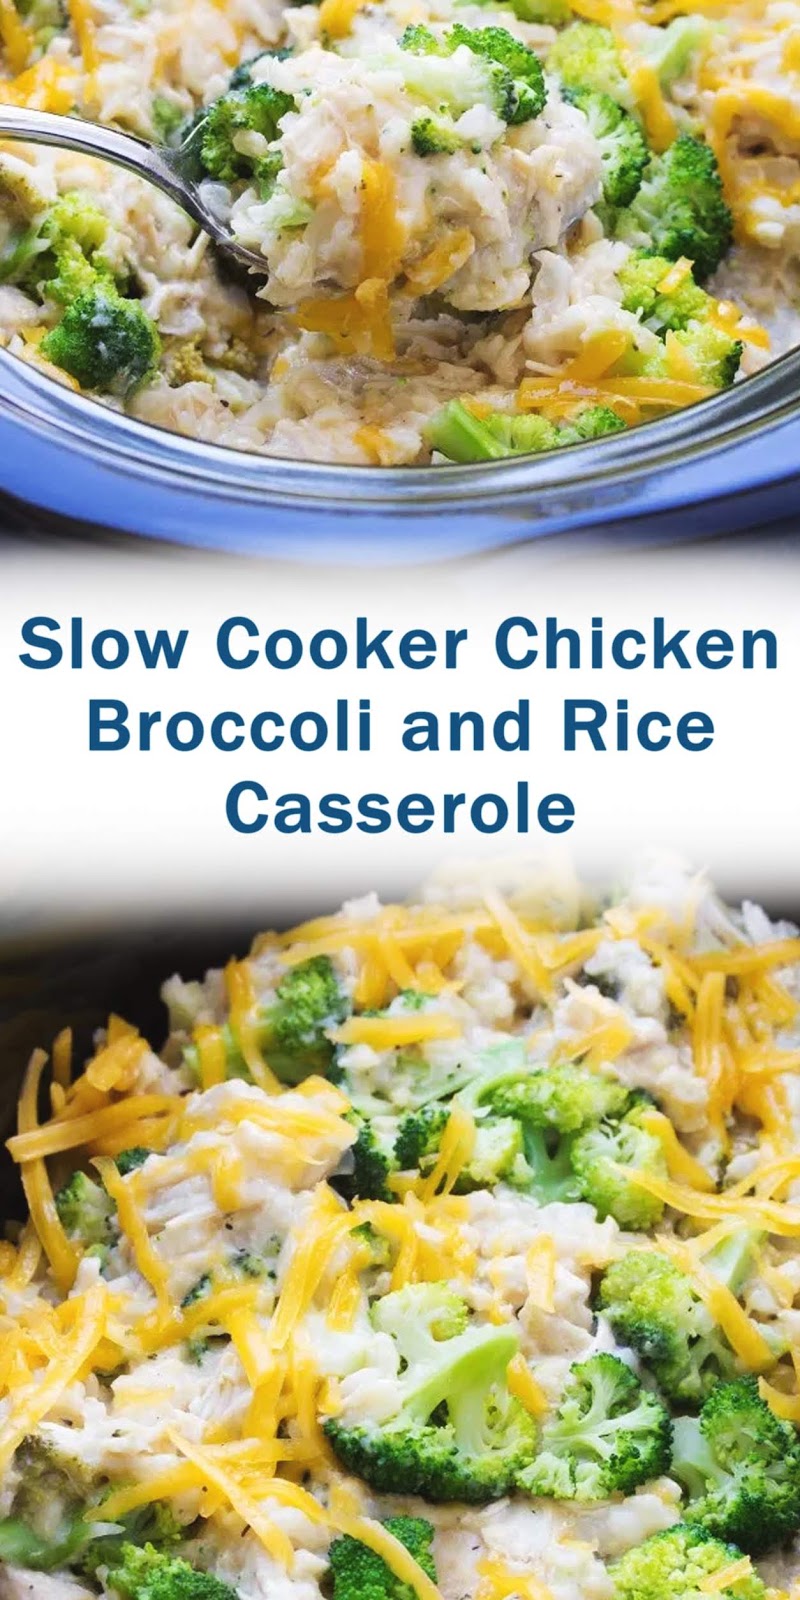 Slow Cooker Chicken Broccoli and Rice Casserole